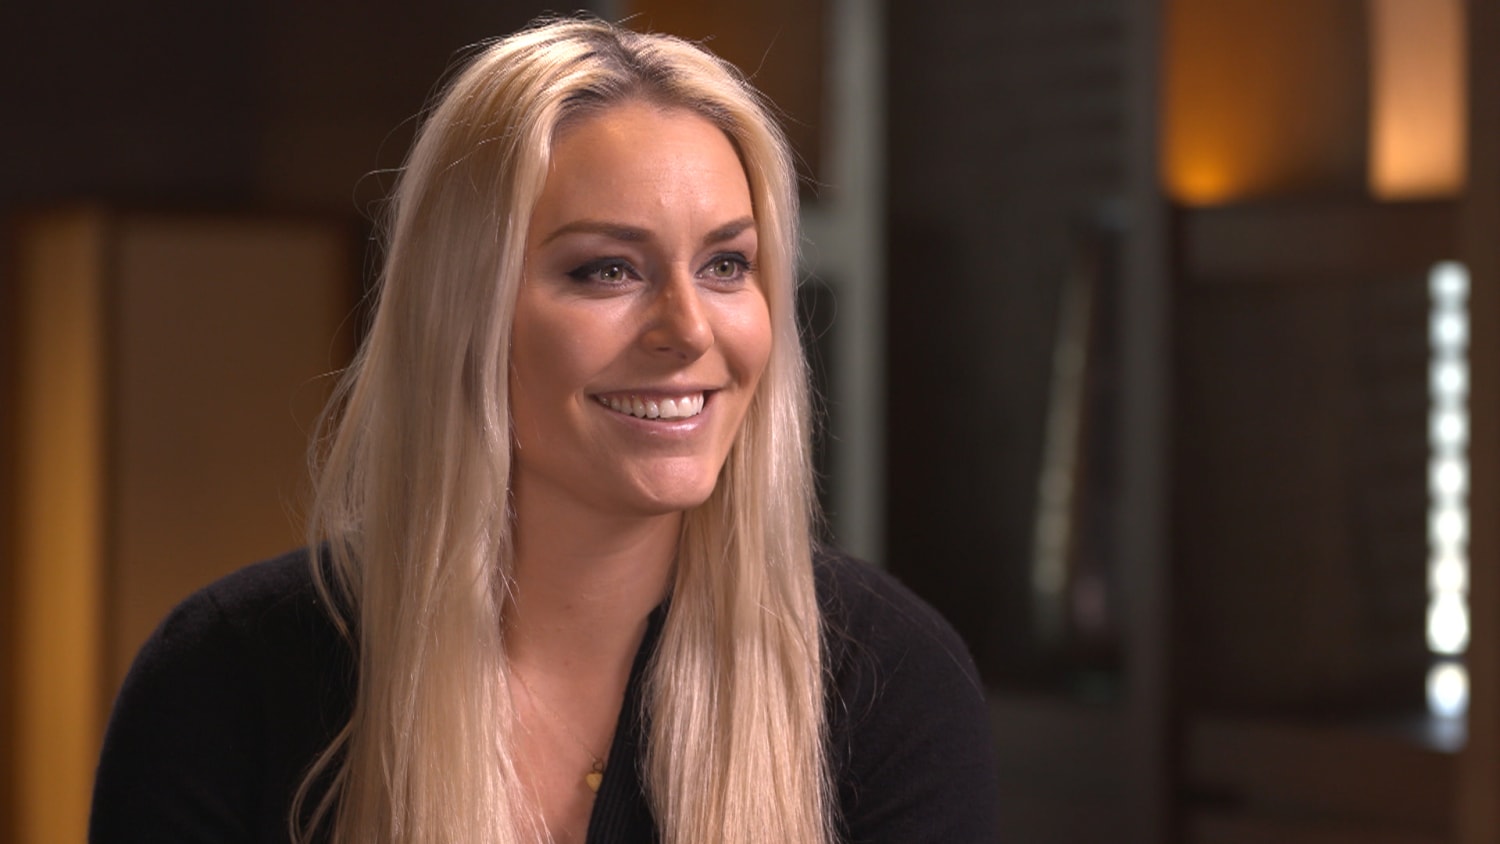 Lindsey Vonn contemplates Hollywood after Winter Olympics run.